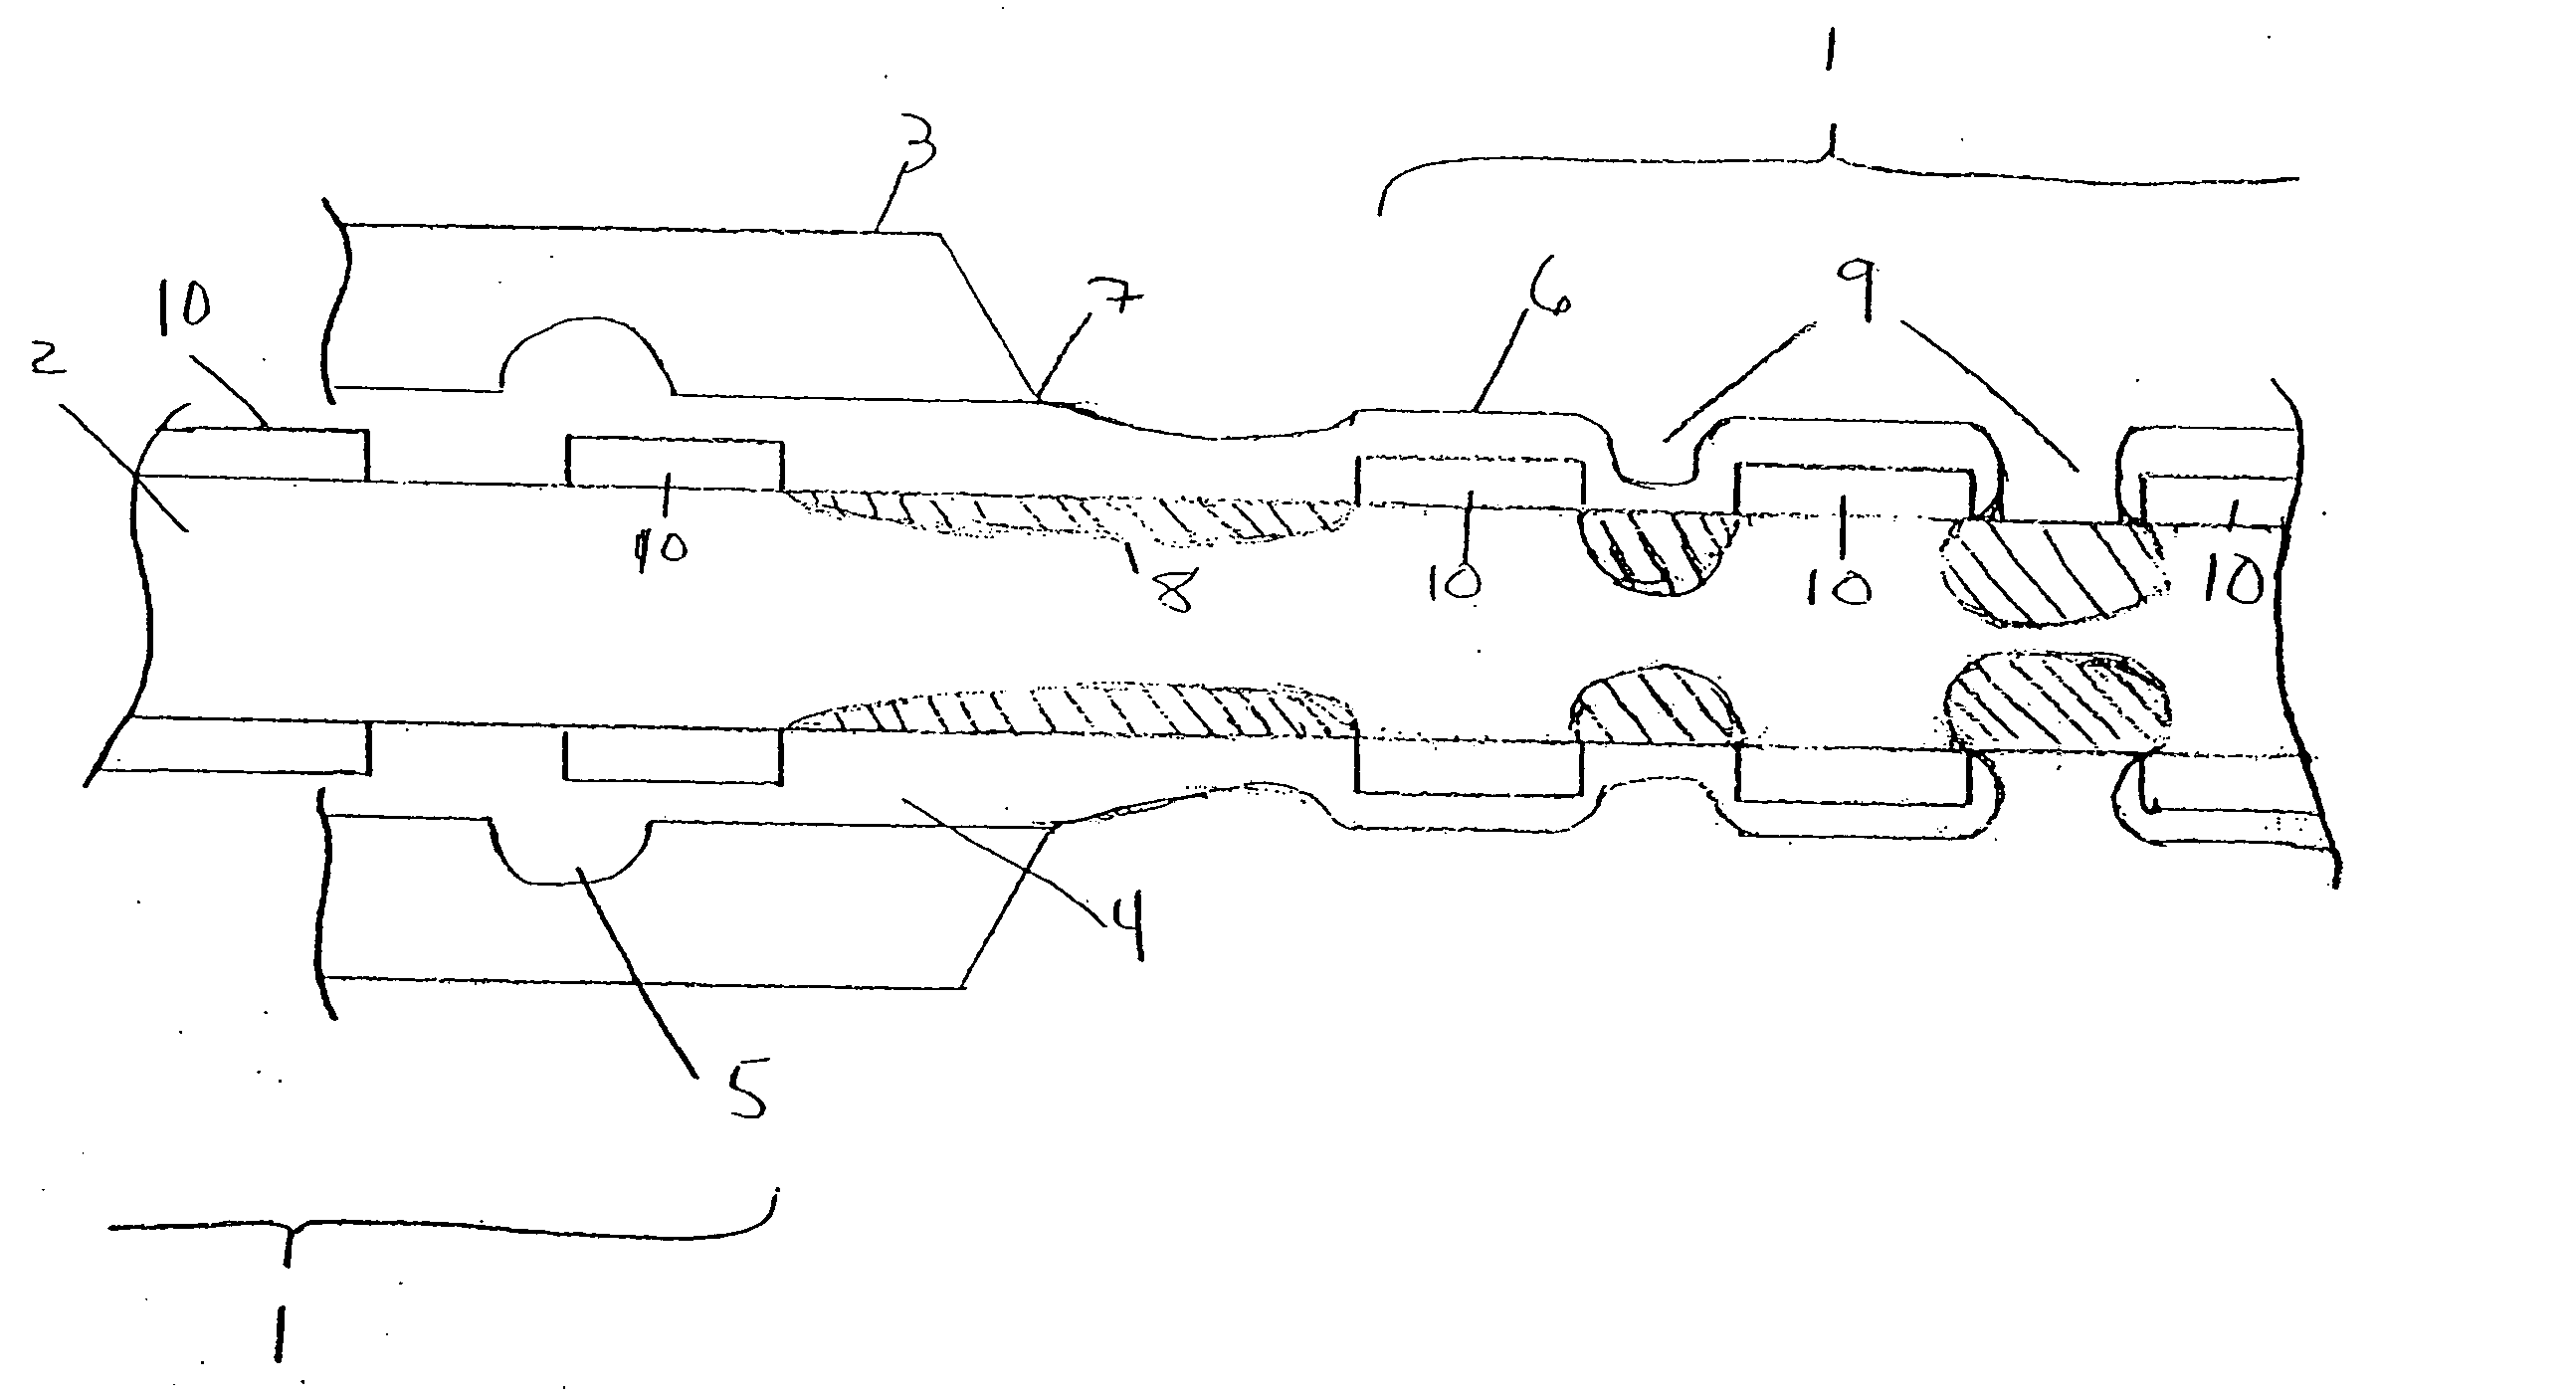 Method and system for coating tubular medical devices